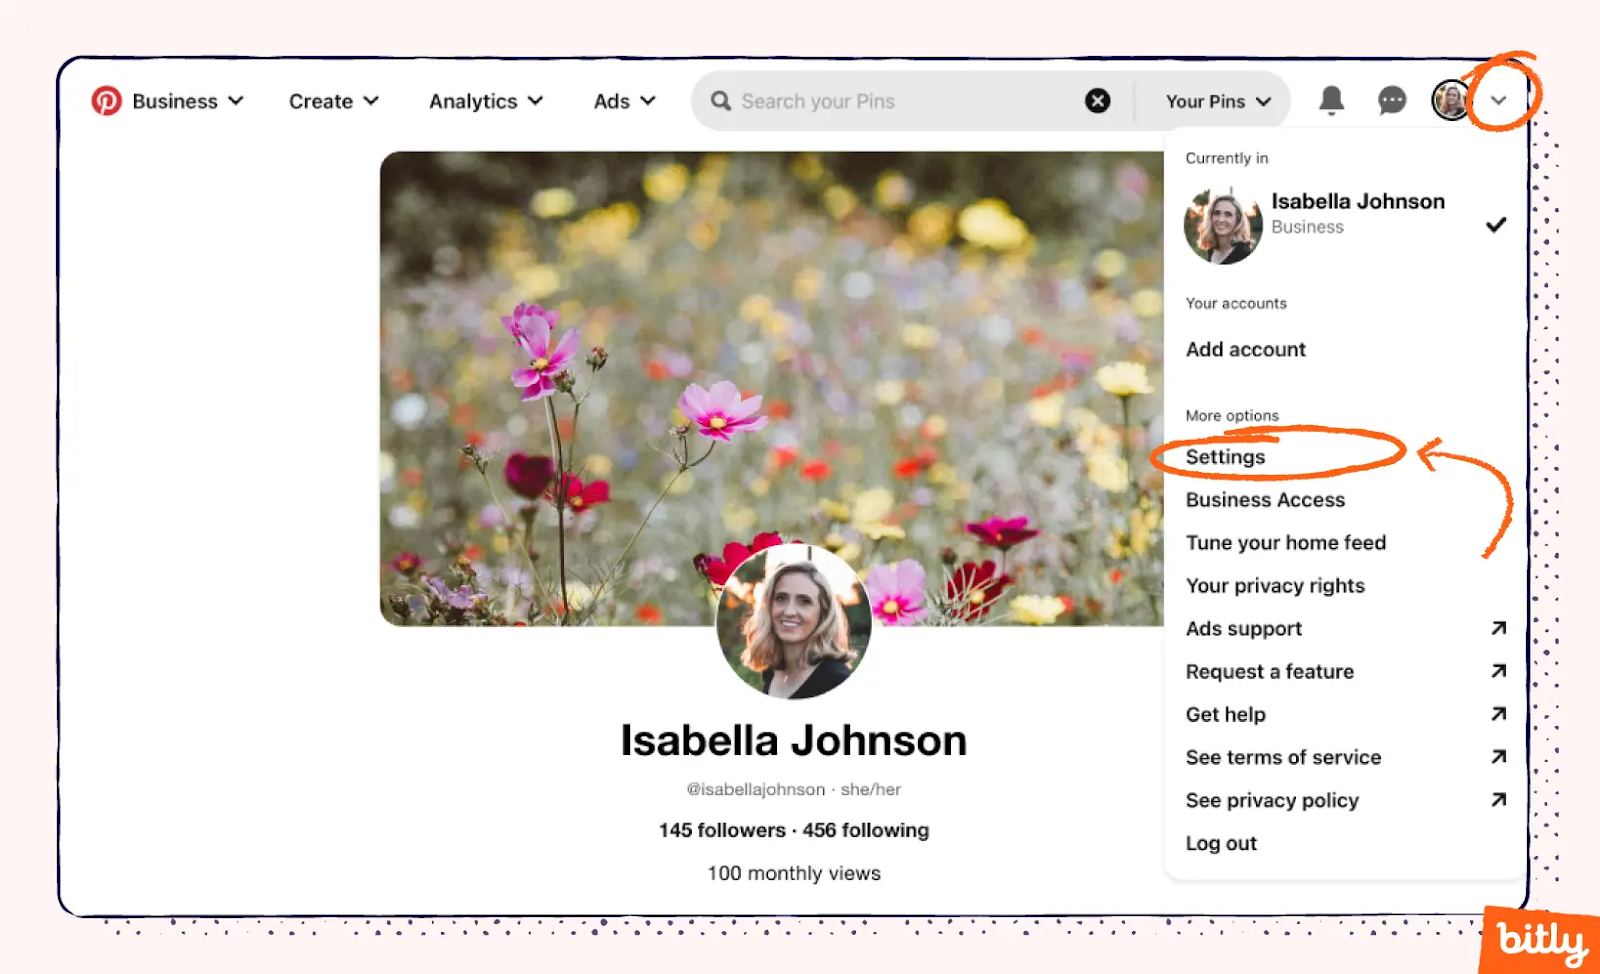 An example of where to find Settings on the right sidebar of the Pinterest site